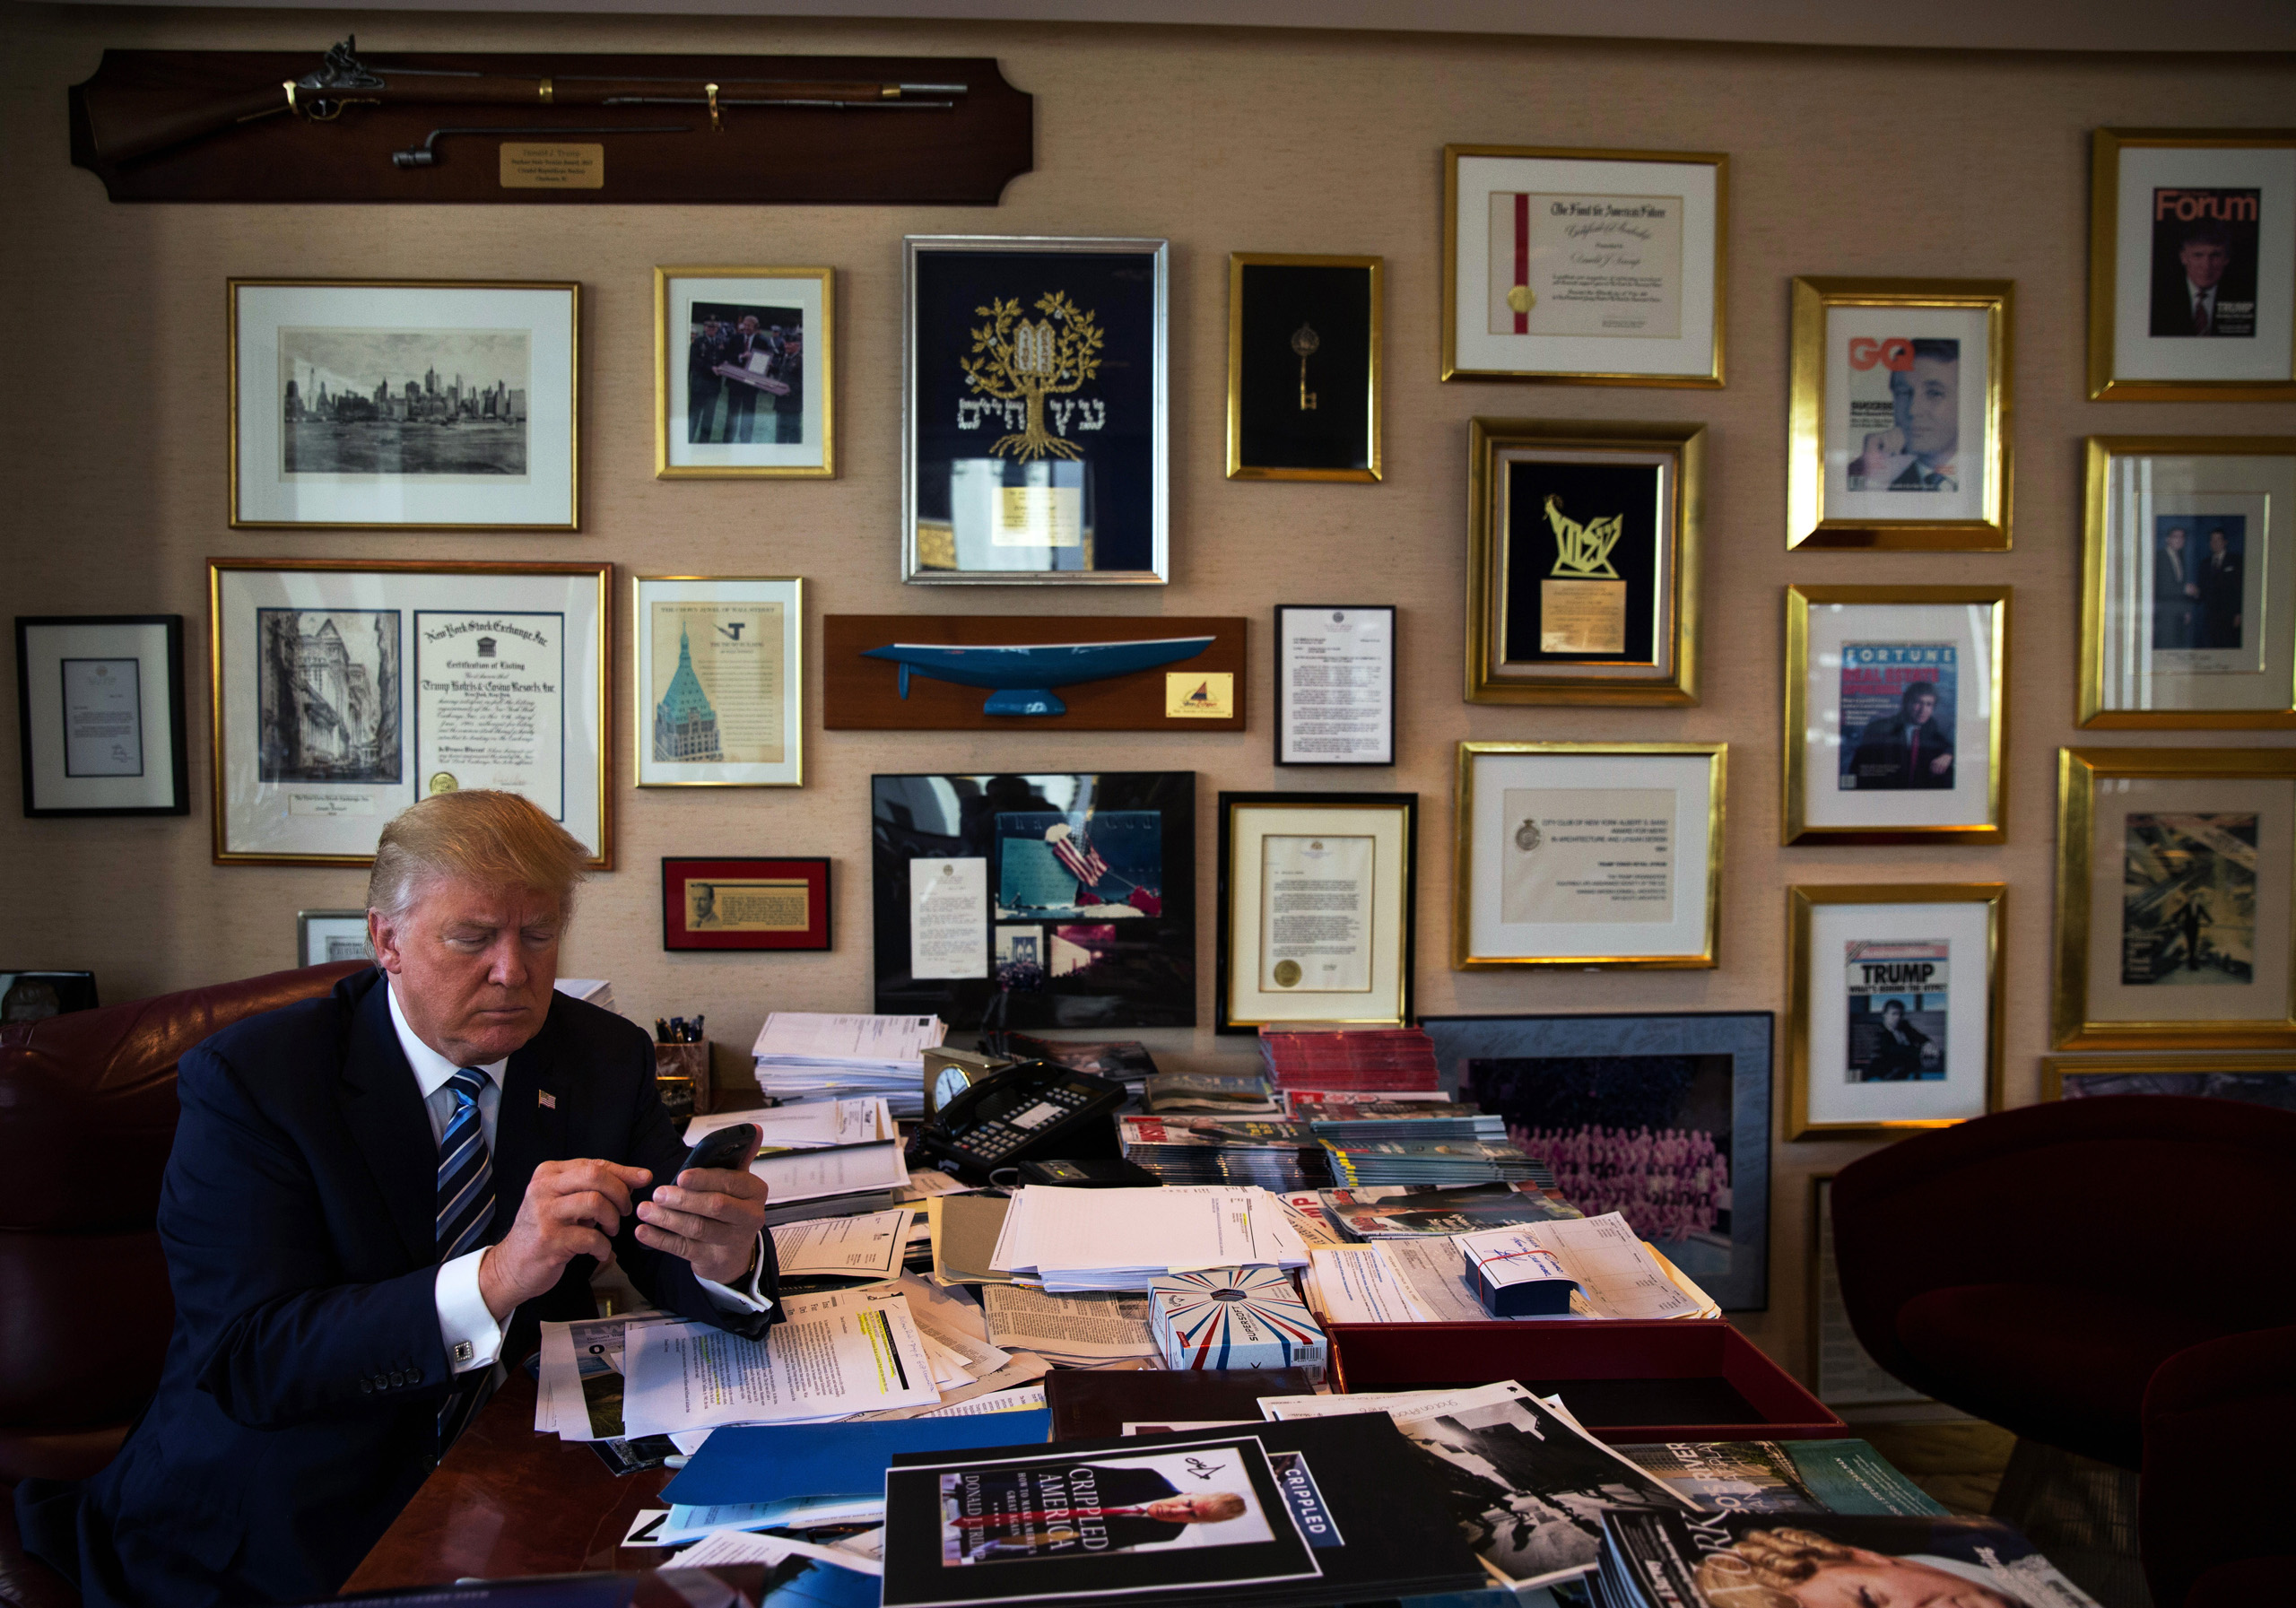 Donald Trump demonstrates how he Tweets using his Samsung phone in his office in the Trump Tower in New York.